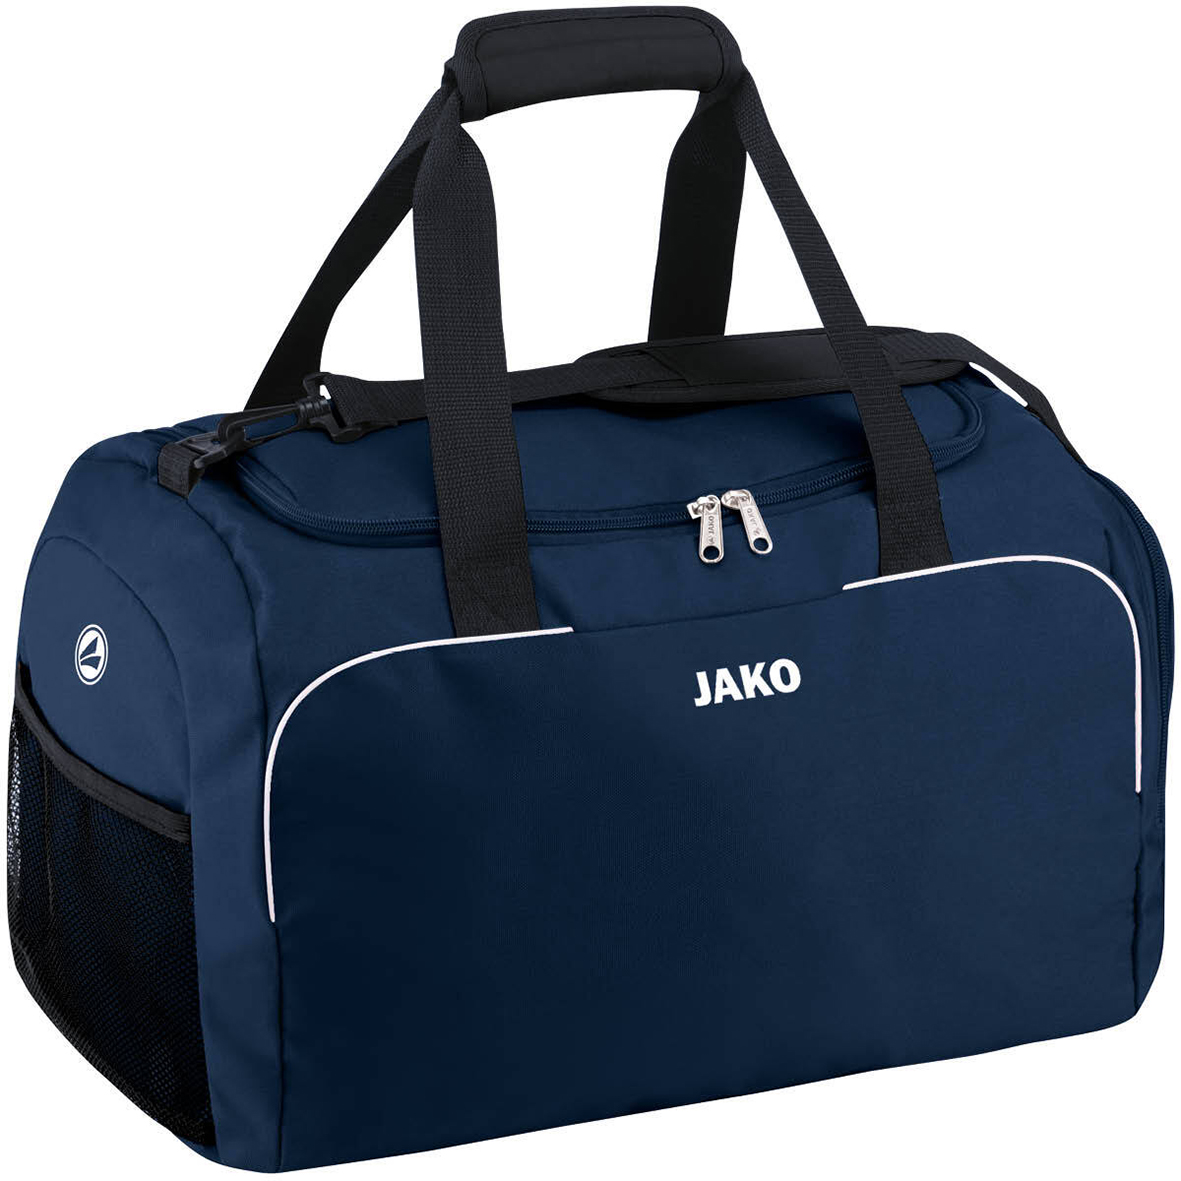 SPORTS BAG JAKO CLASSICO WITH SIDE WET COMPARTMENTS, SEABLUE.